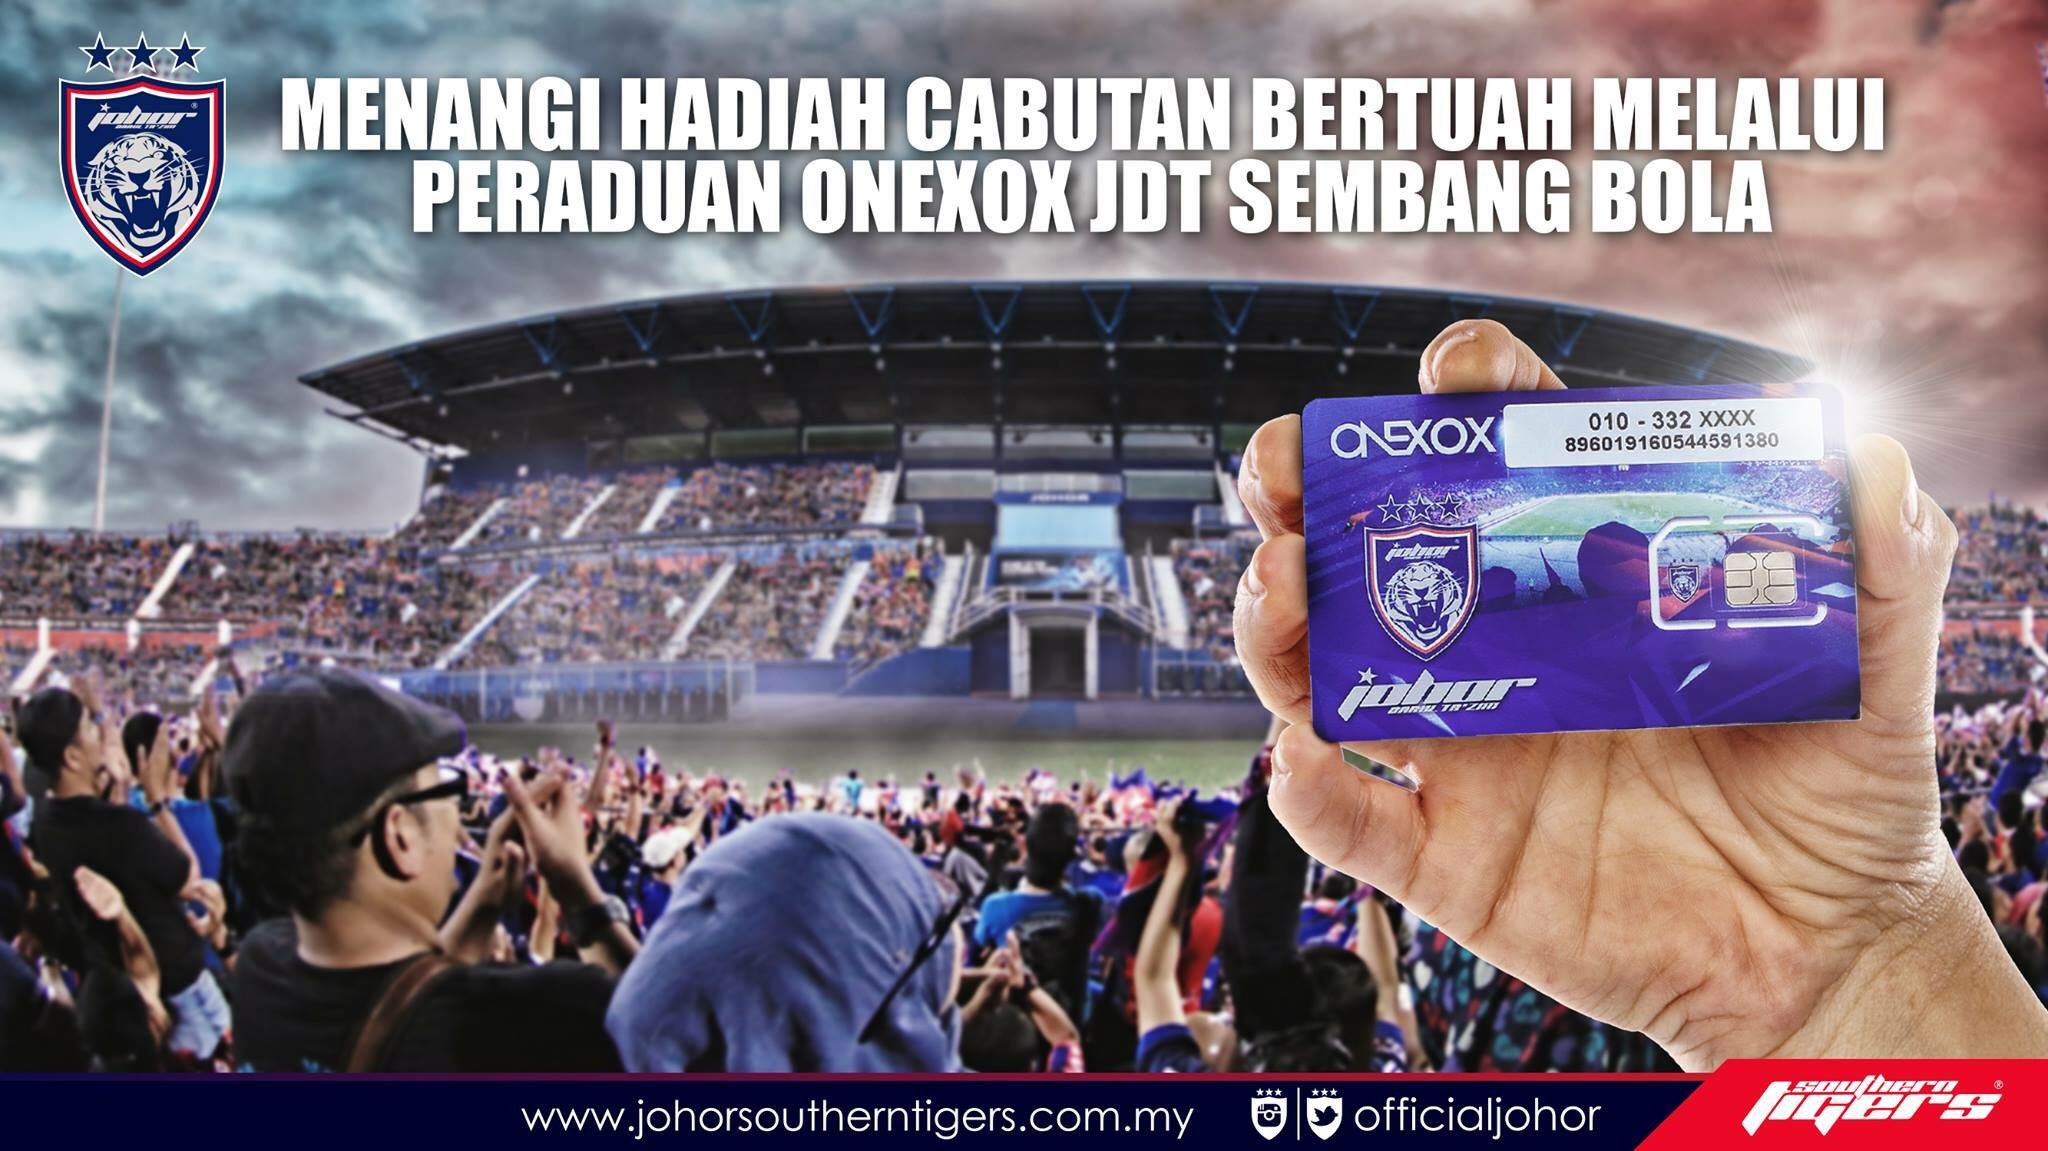 JOHORSouthernTigers on Twitter: "WIN LUCKY DRAW PRIZES IN ONEXOX JDT  SEMBANG BOLA CONTEST Refer our T&C at https://t.co/y9Q1YQ31CB… "